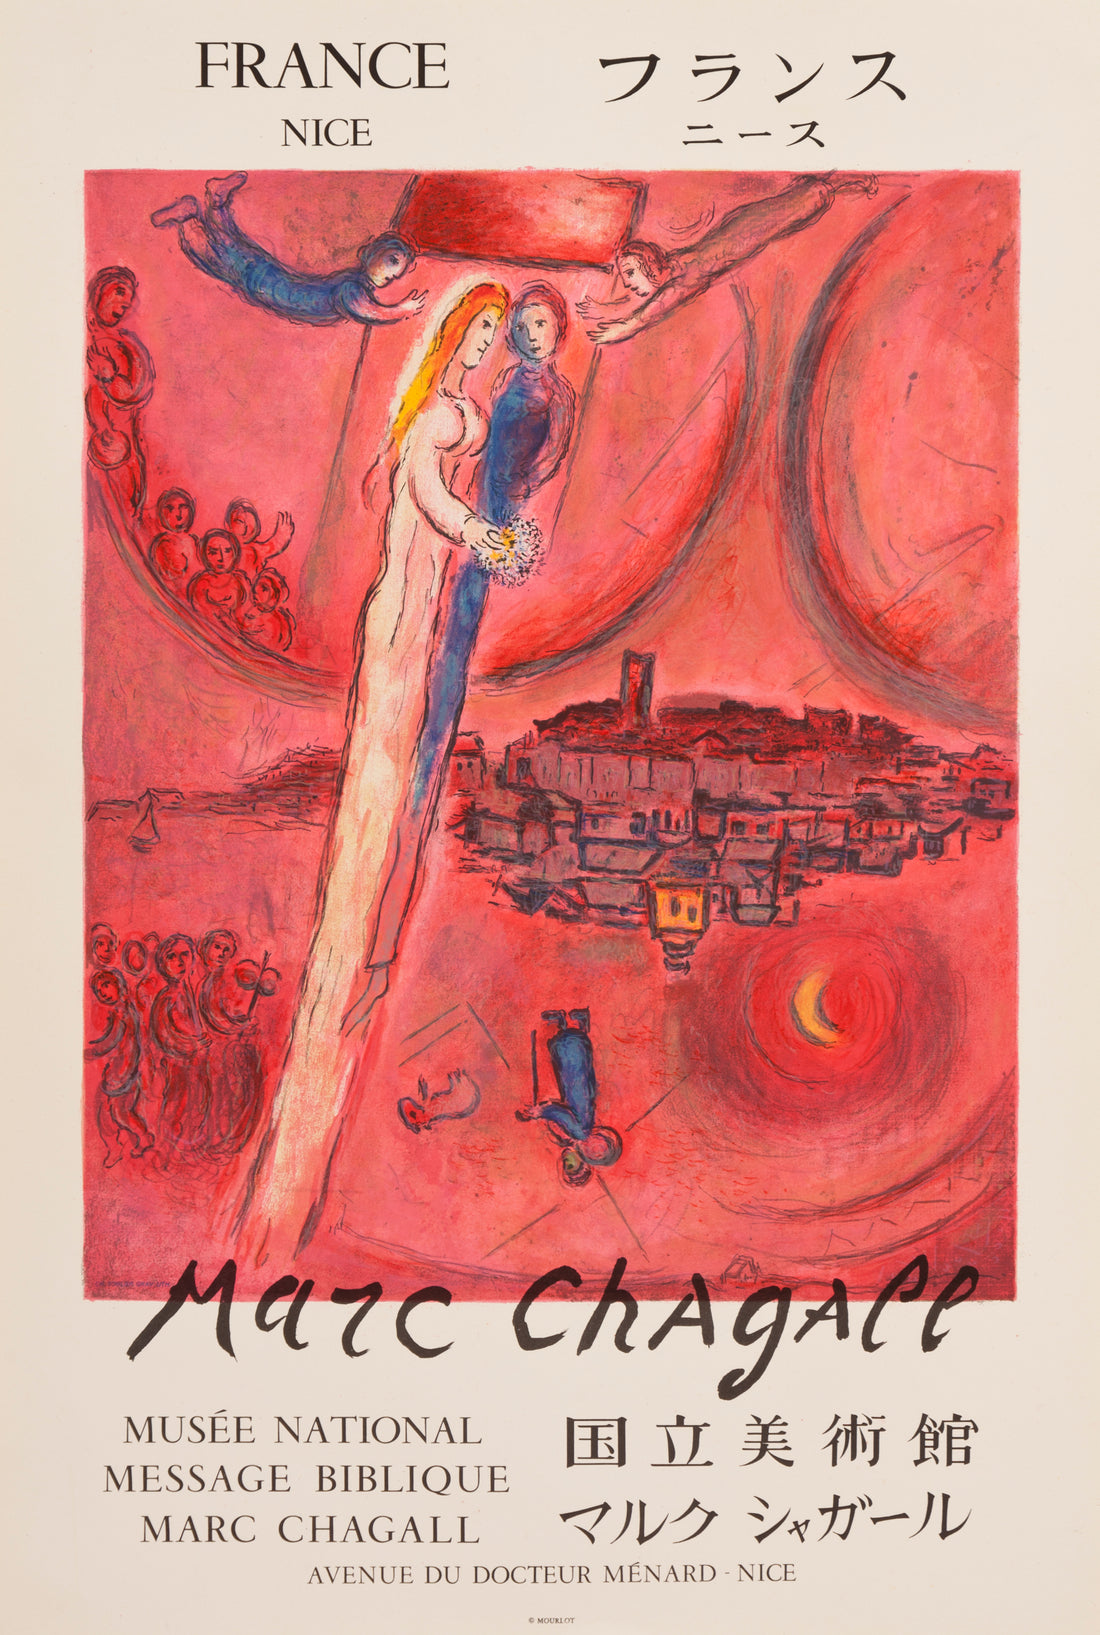 Chagall posters, Posters, Posters art, Mourlot posters